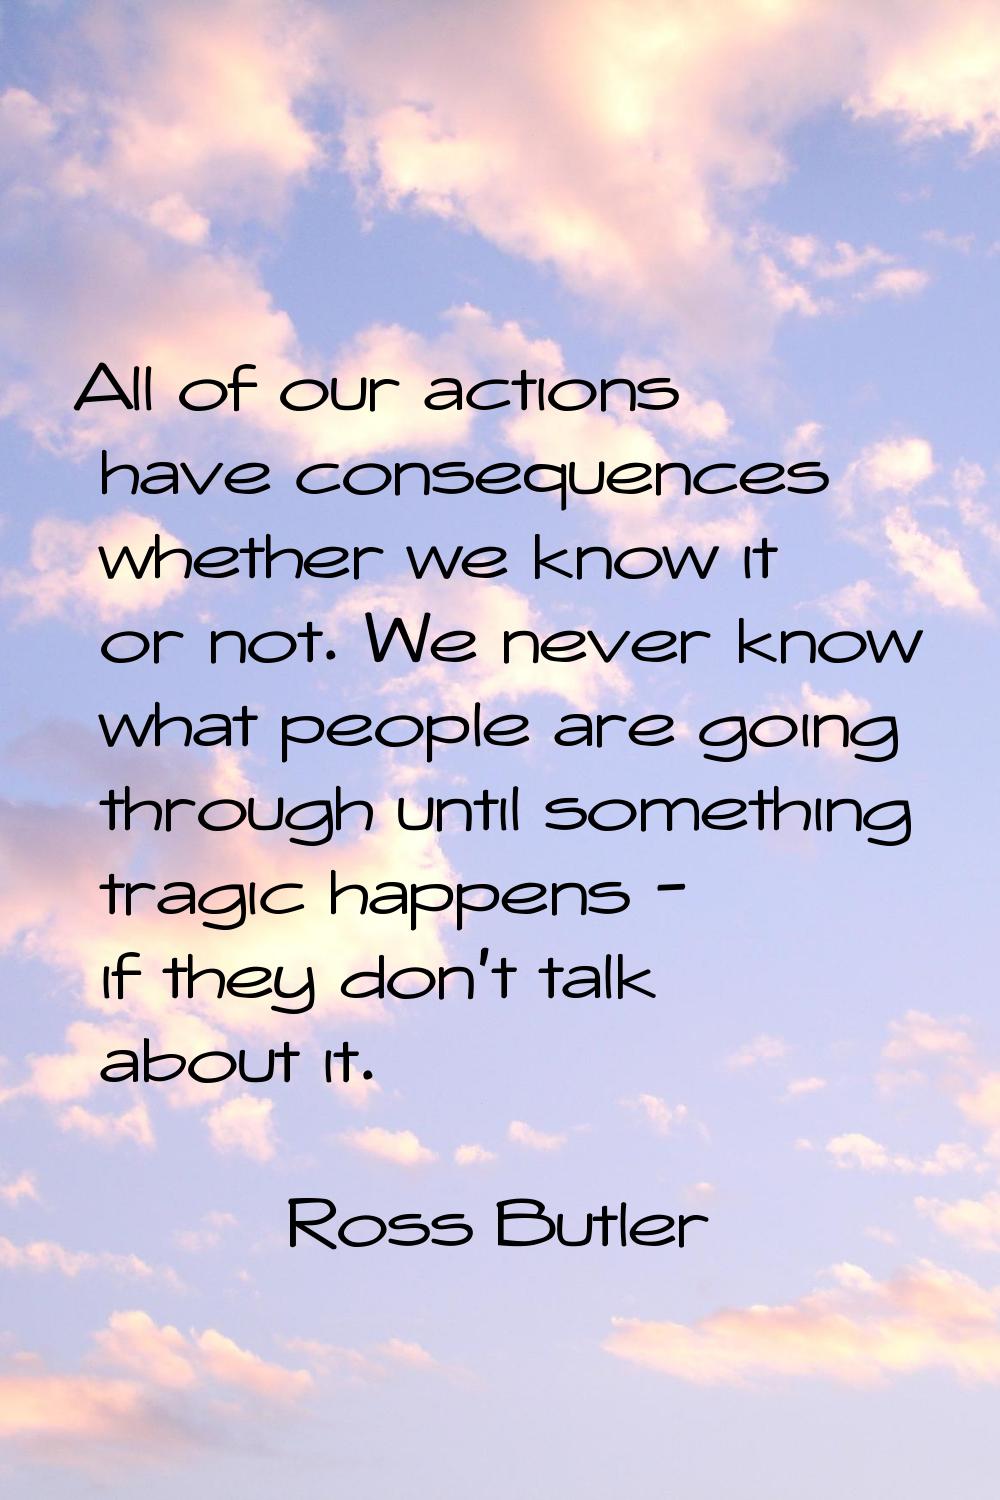 All of our actions have consequences whether we know it or not. We never know what people are going